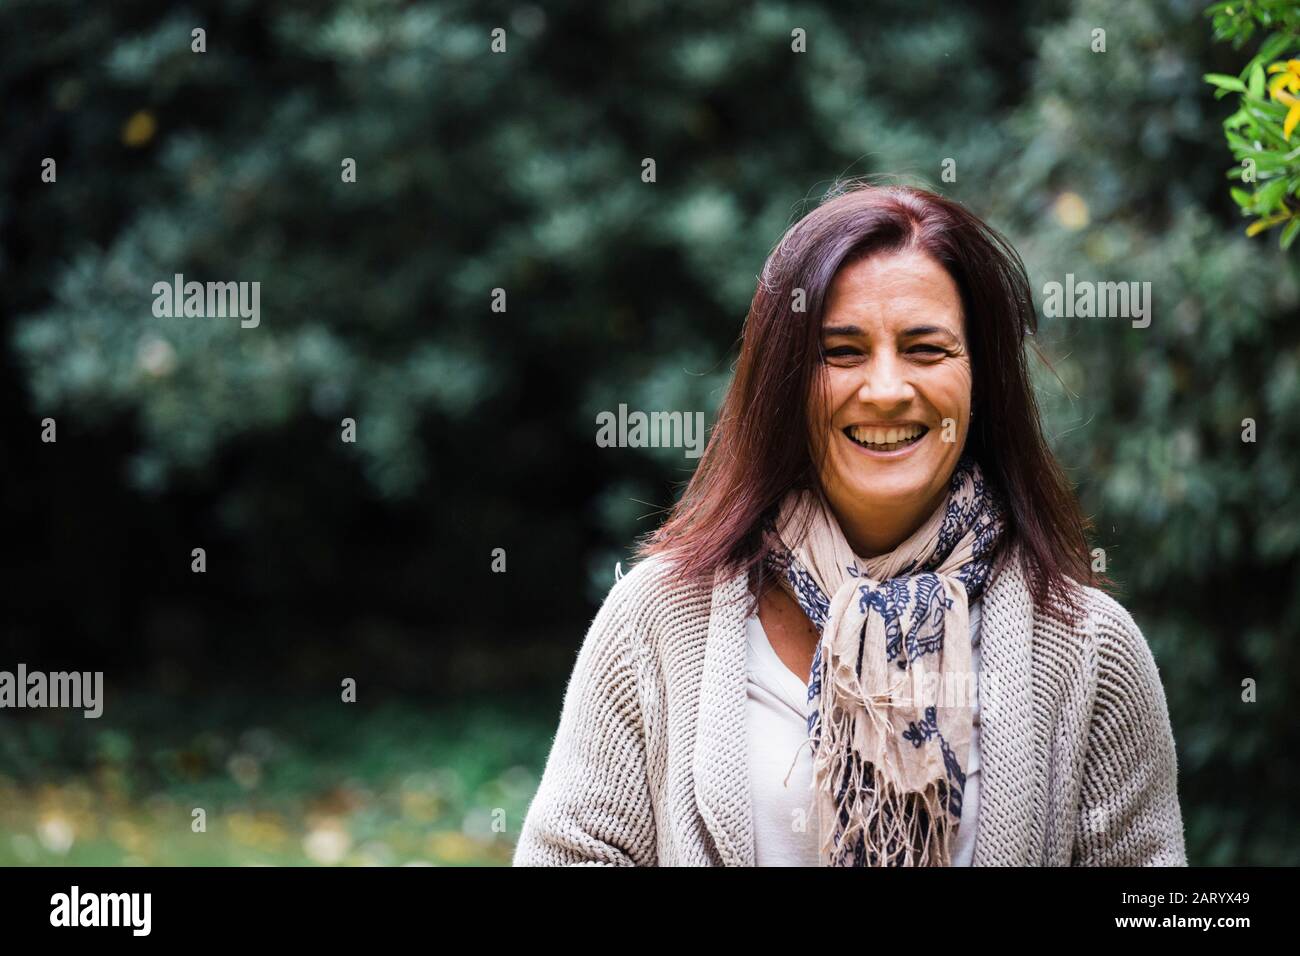 Smiling woman by trees Stock Photo